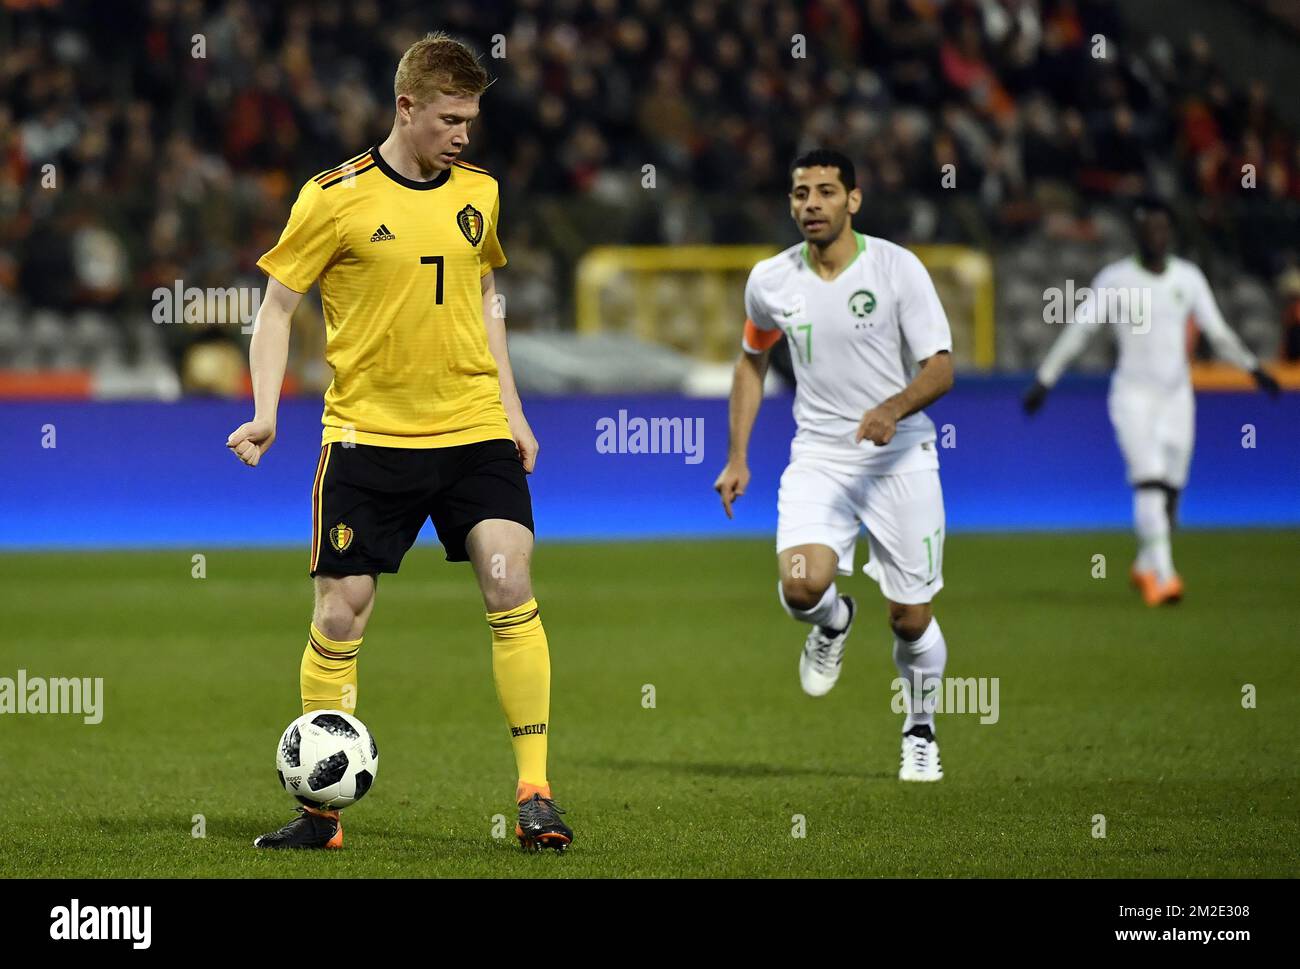 Belgium's Kevin De Bruyne and Saudi Arabia's captain Taisir Al-Jassim pictured in action during a friendly game between the Red Devils Belgian National soccer team and Saudi Arabia, in Brussels, Tuesday 27 March 2018. BELGA PHOTO DIRK WAEM Stock Photo